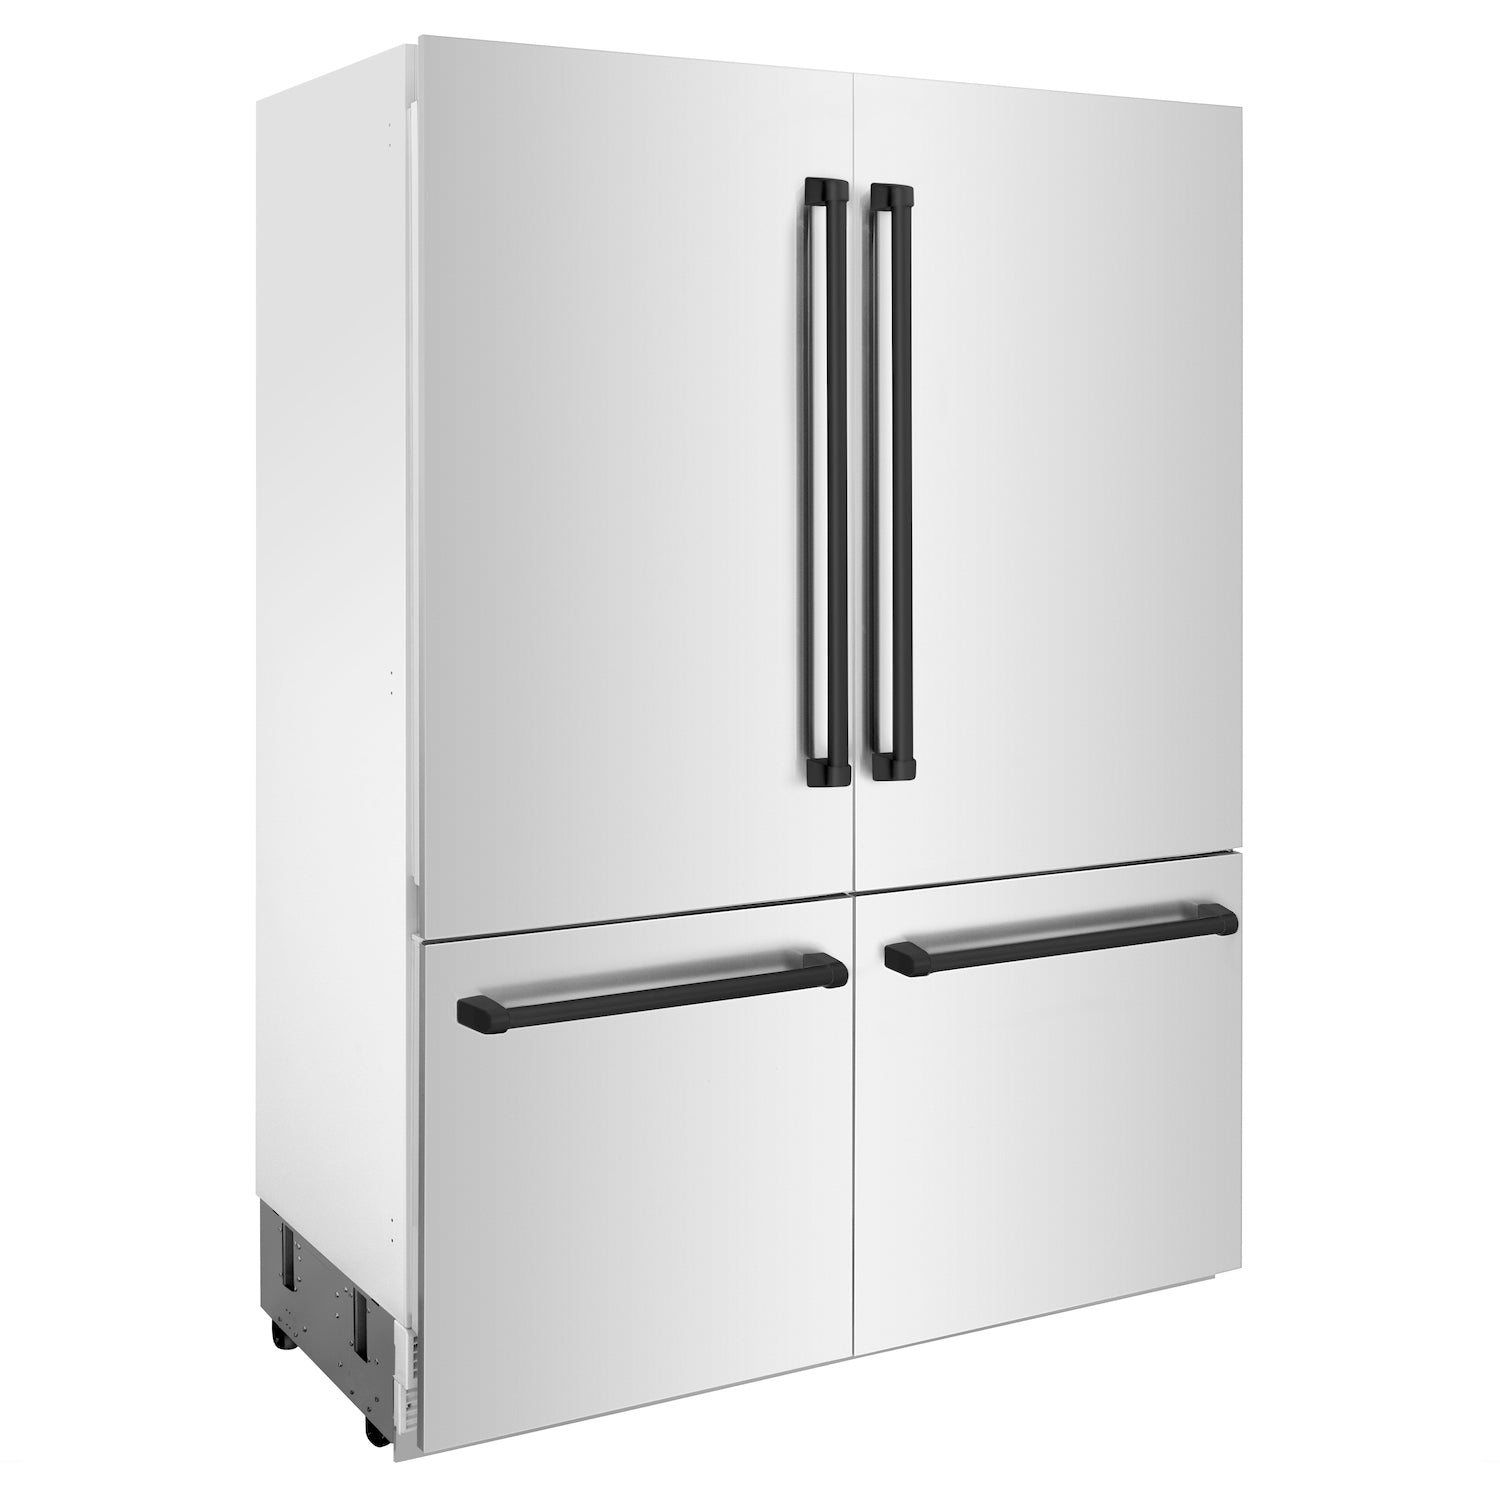 ZLINE 60" Autograph Edition Built-in Refrigerator with Stainless Steel Panels and Accent Handles side.